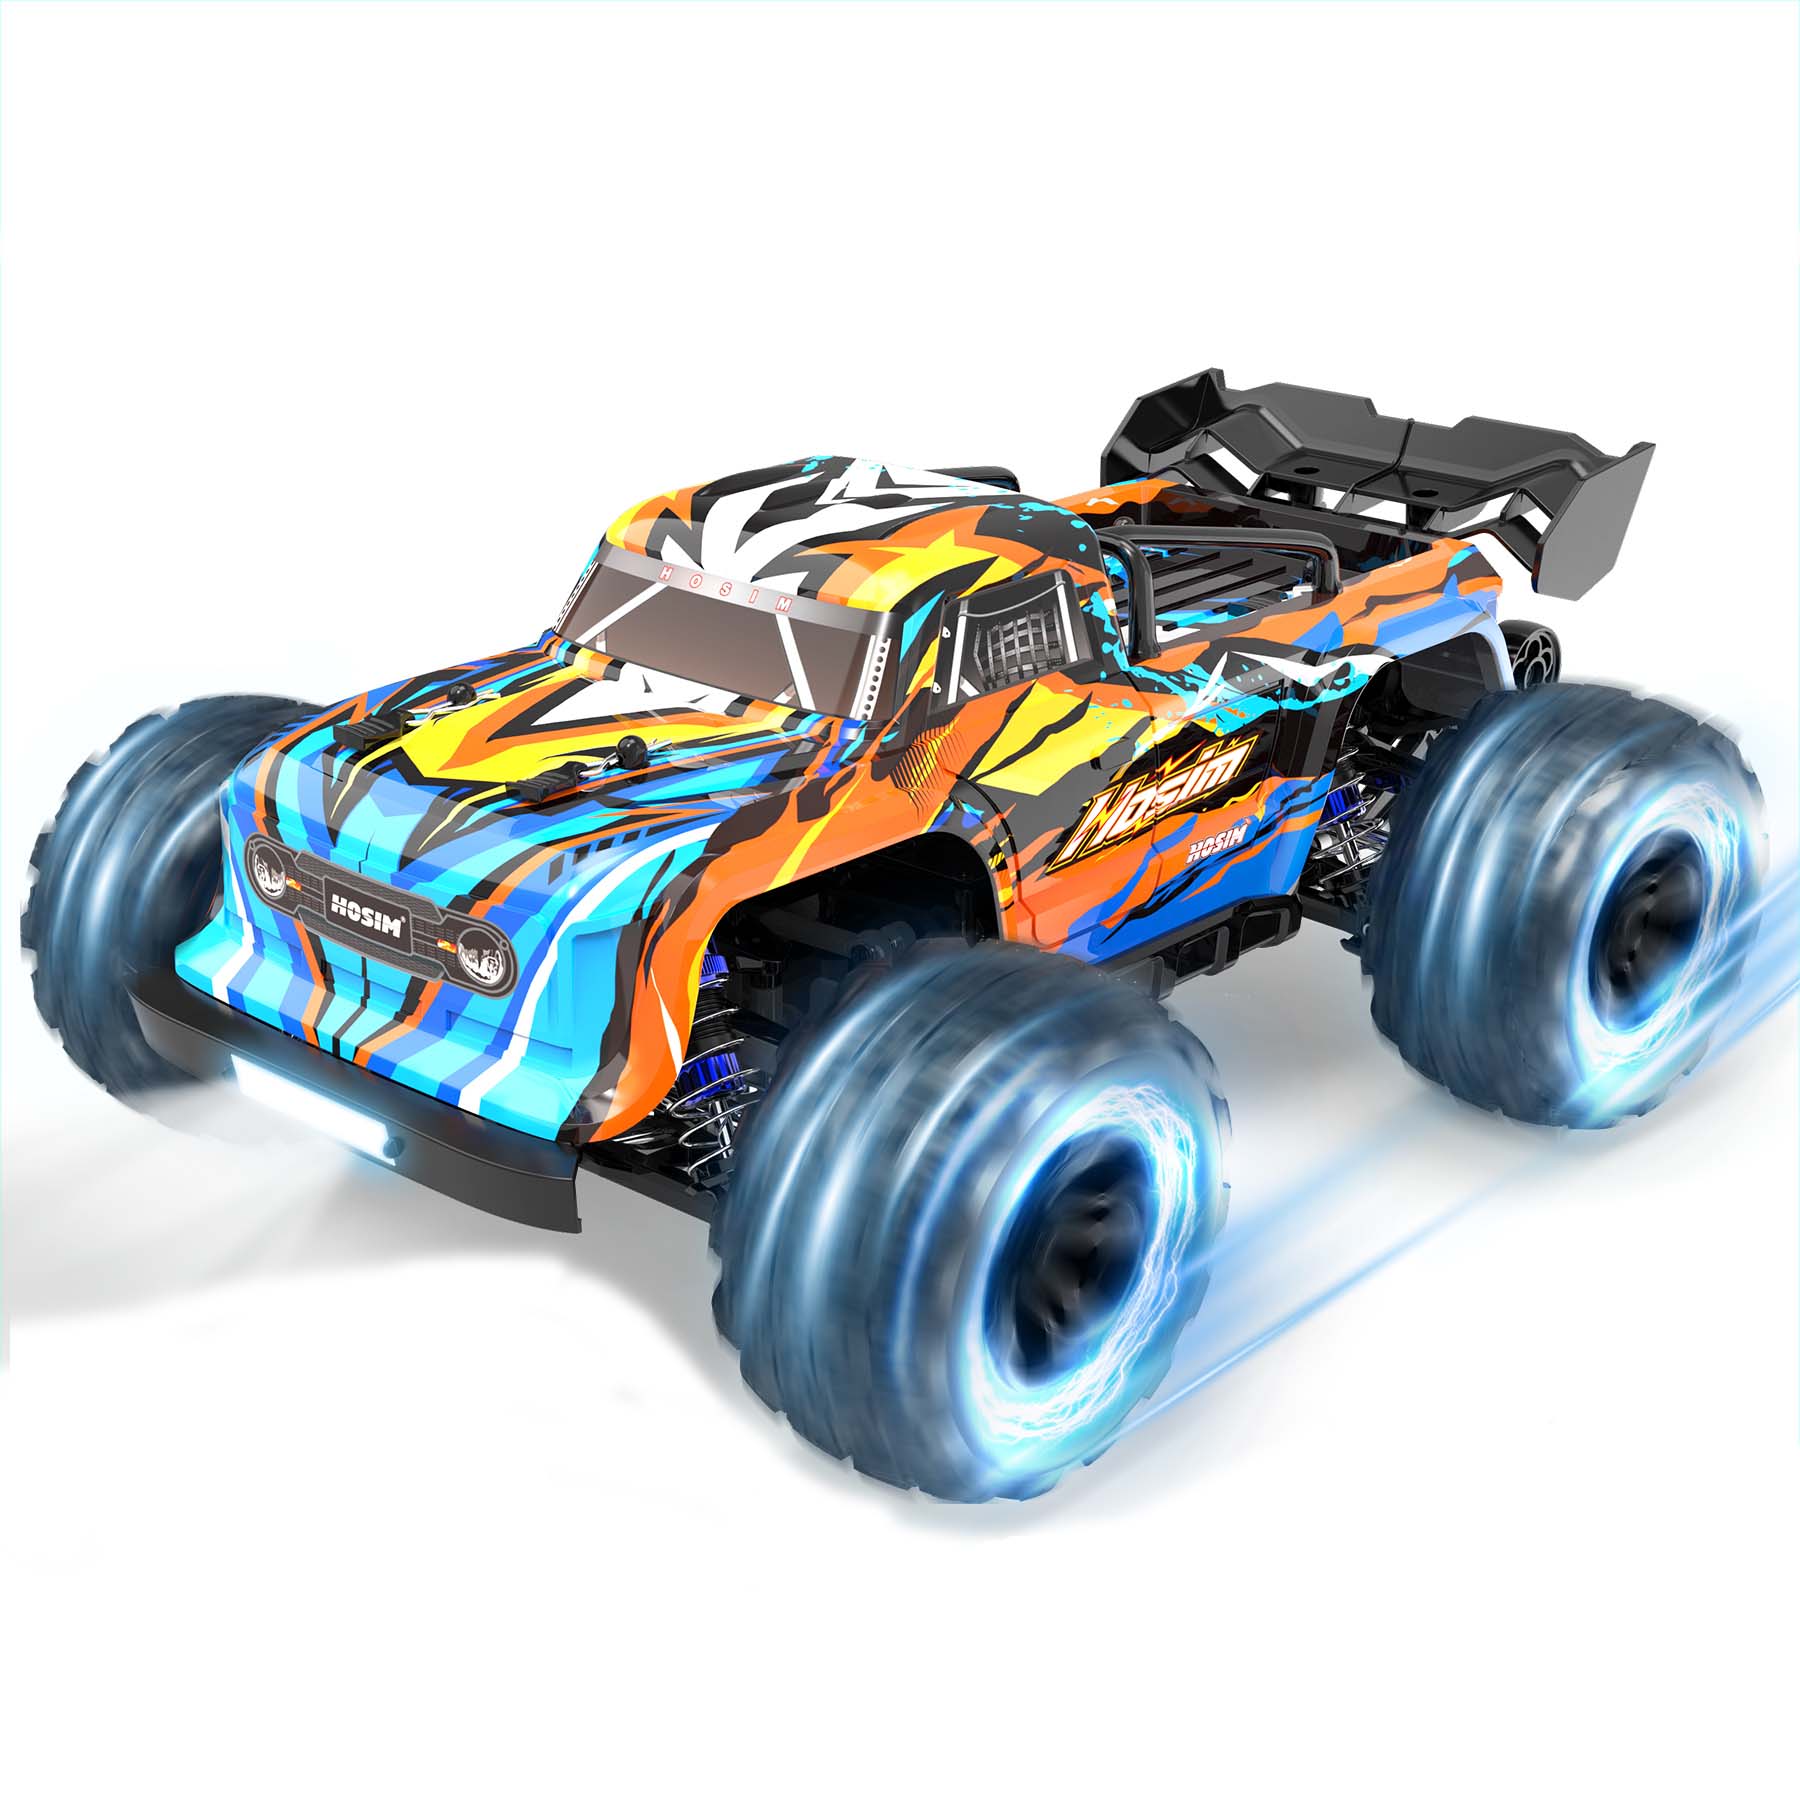 Hosim 1:16 Scale RC Car,4WD 40+KPH All Terrain Waterproof High Speed Electric Toy Off Road RC Monster Truck Vehicle Crawler for Boys Kids and Adults